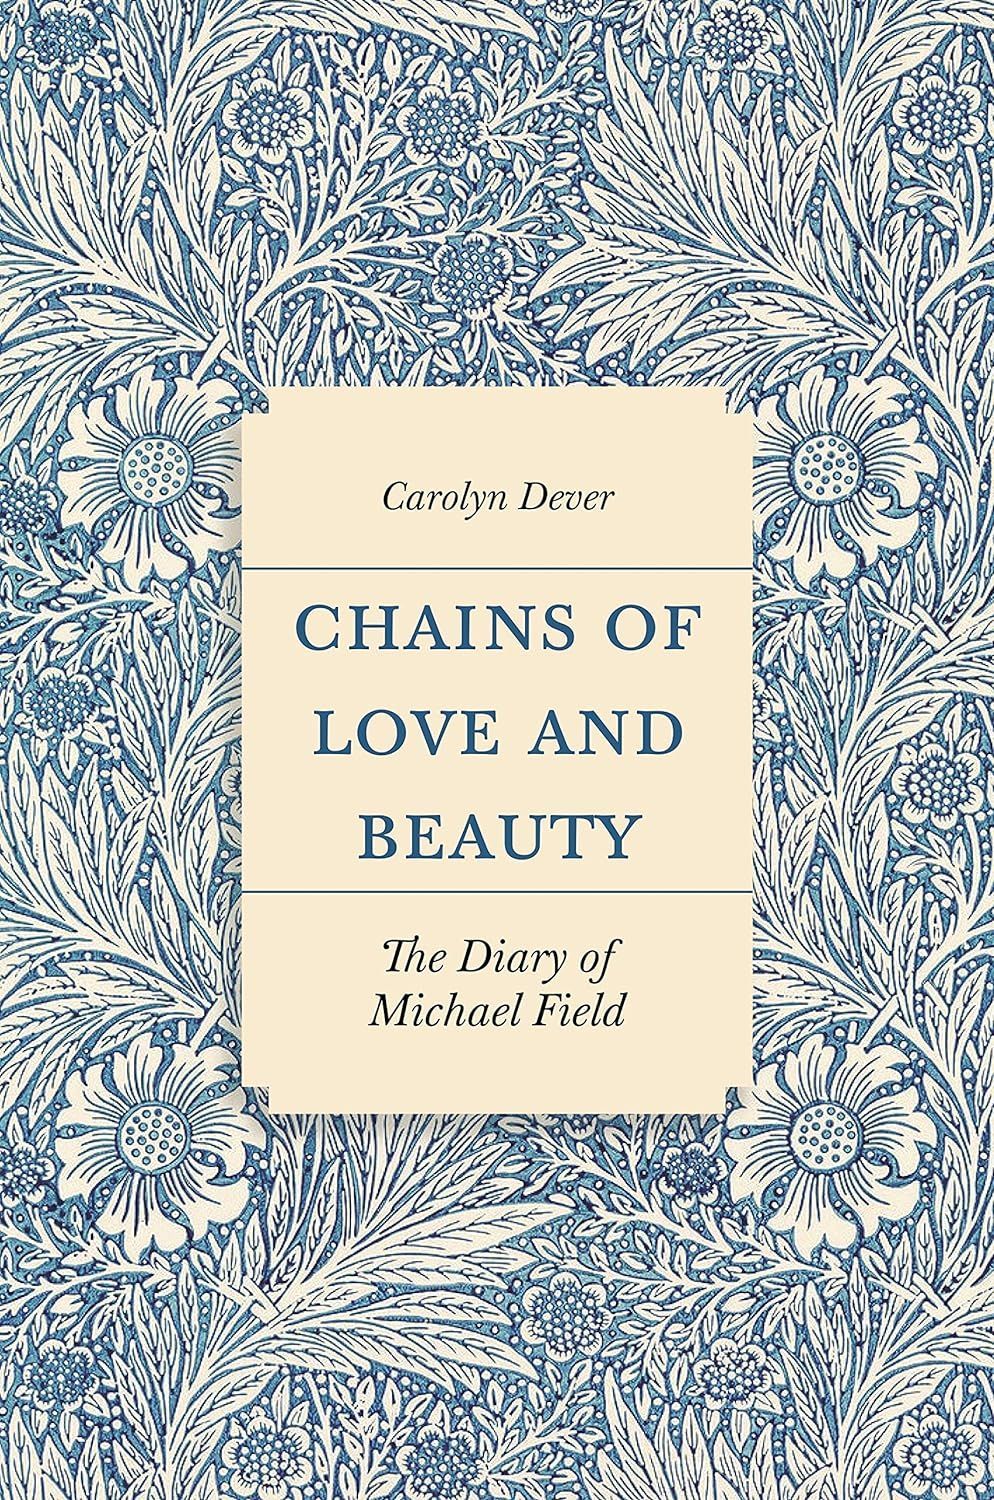 Protomodernist Love Triangle: On Carolyn Dever’s “Chains of Love and Beauty”